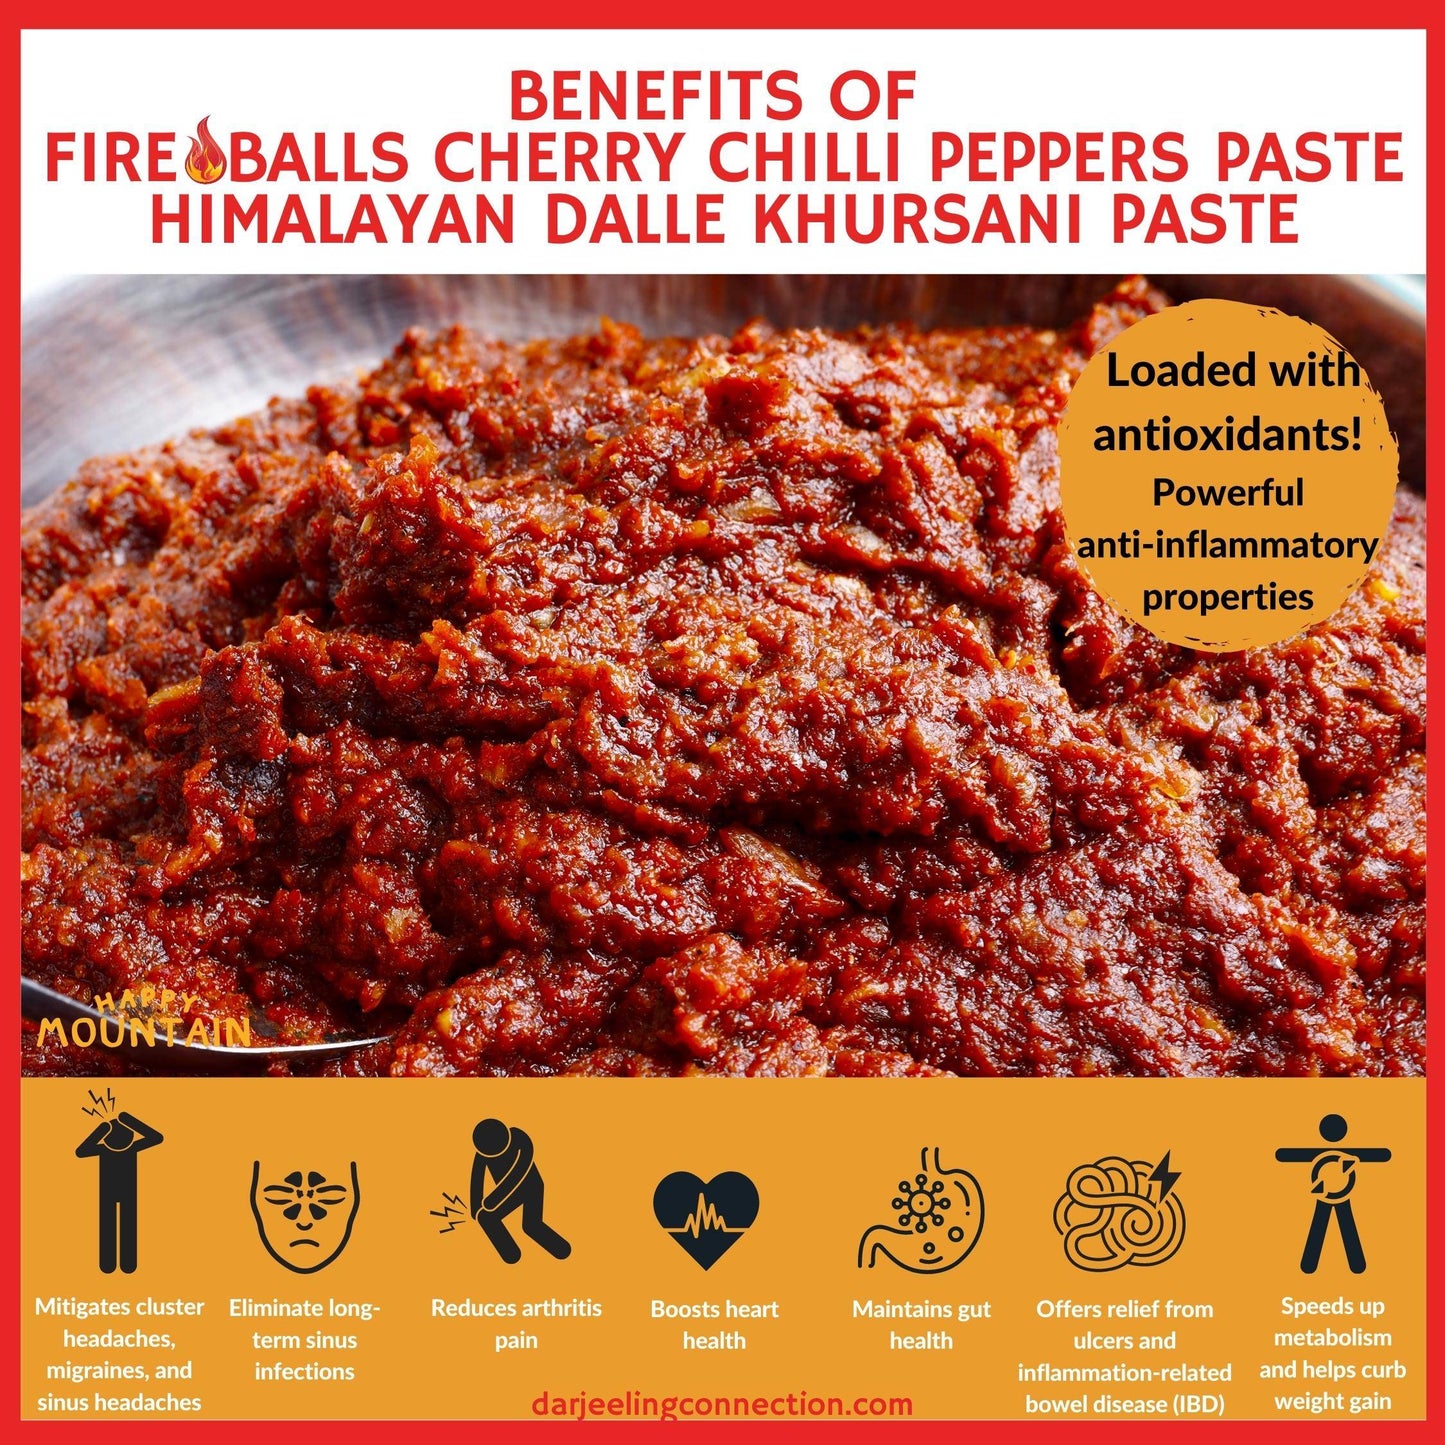 Benefits of Fireballs - Cherry Chilli Peppers (Dalle) Paste - Happy Mountain